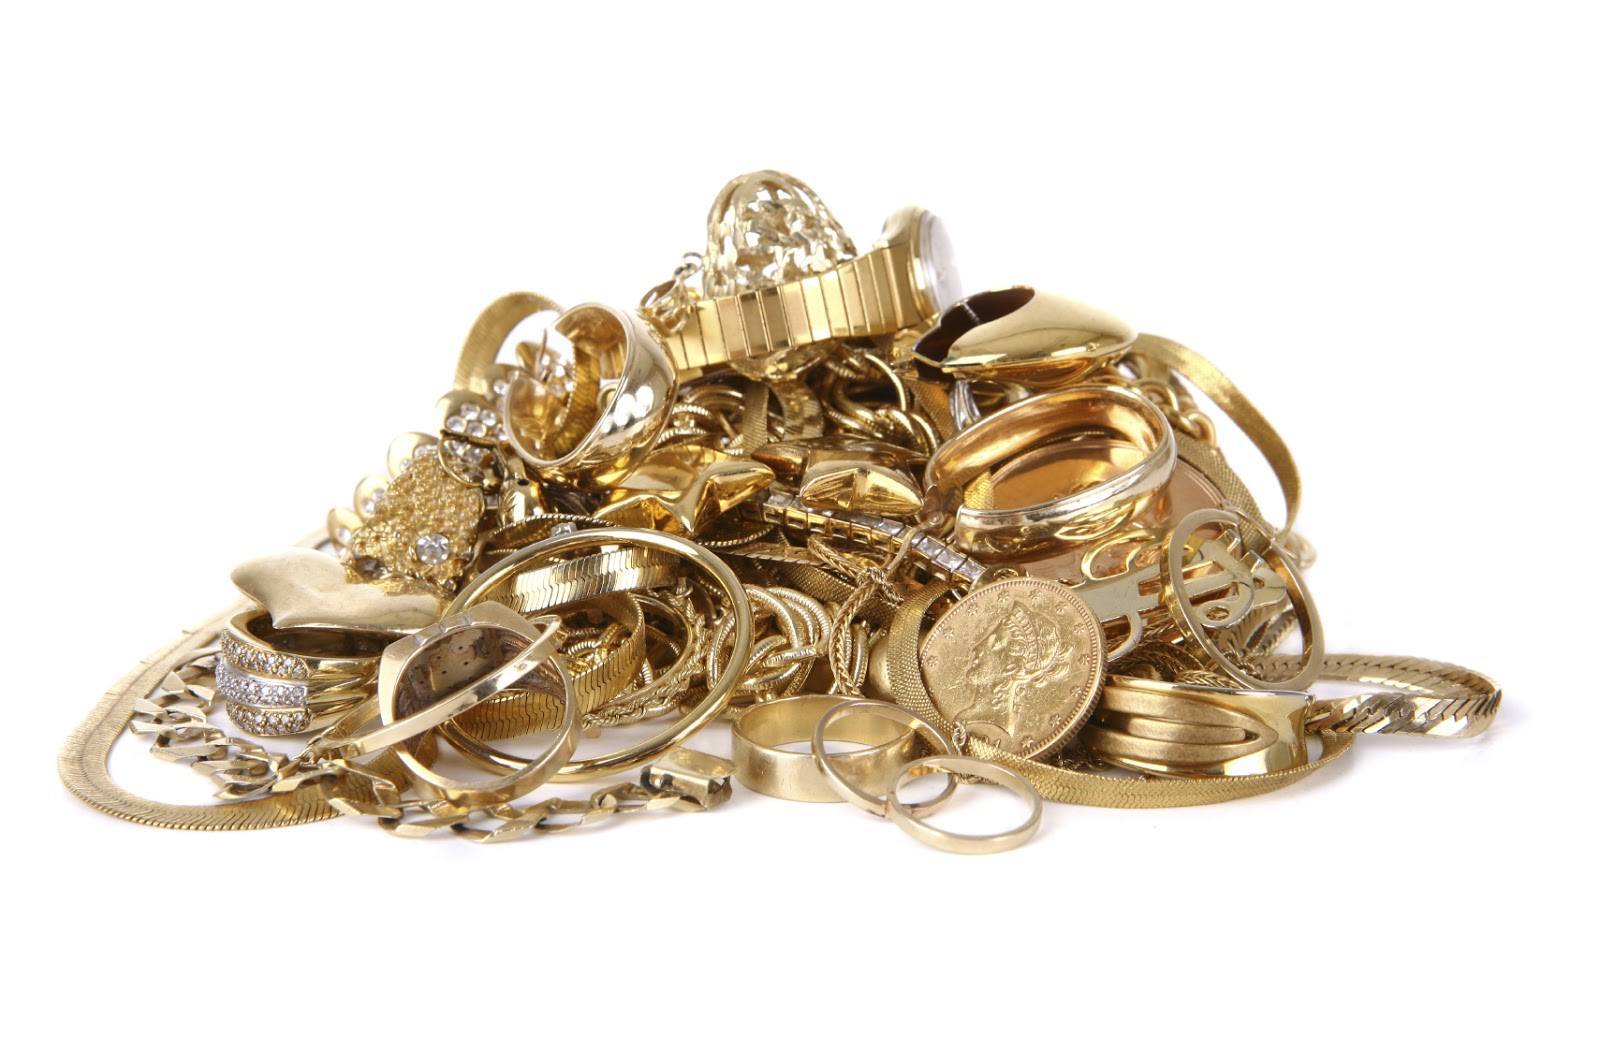 B & B Pawn and Gold will quickly become your favorite jewelry store to come to